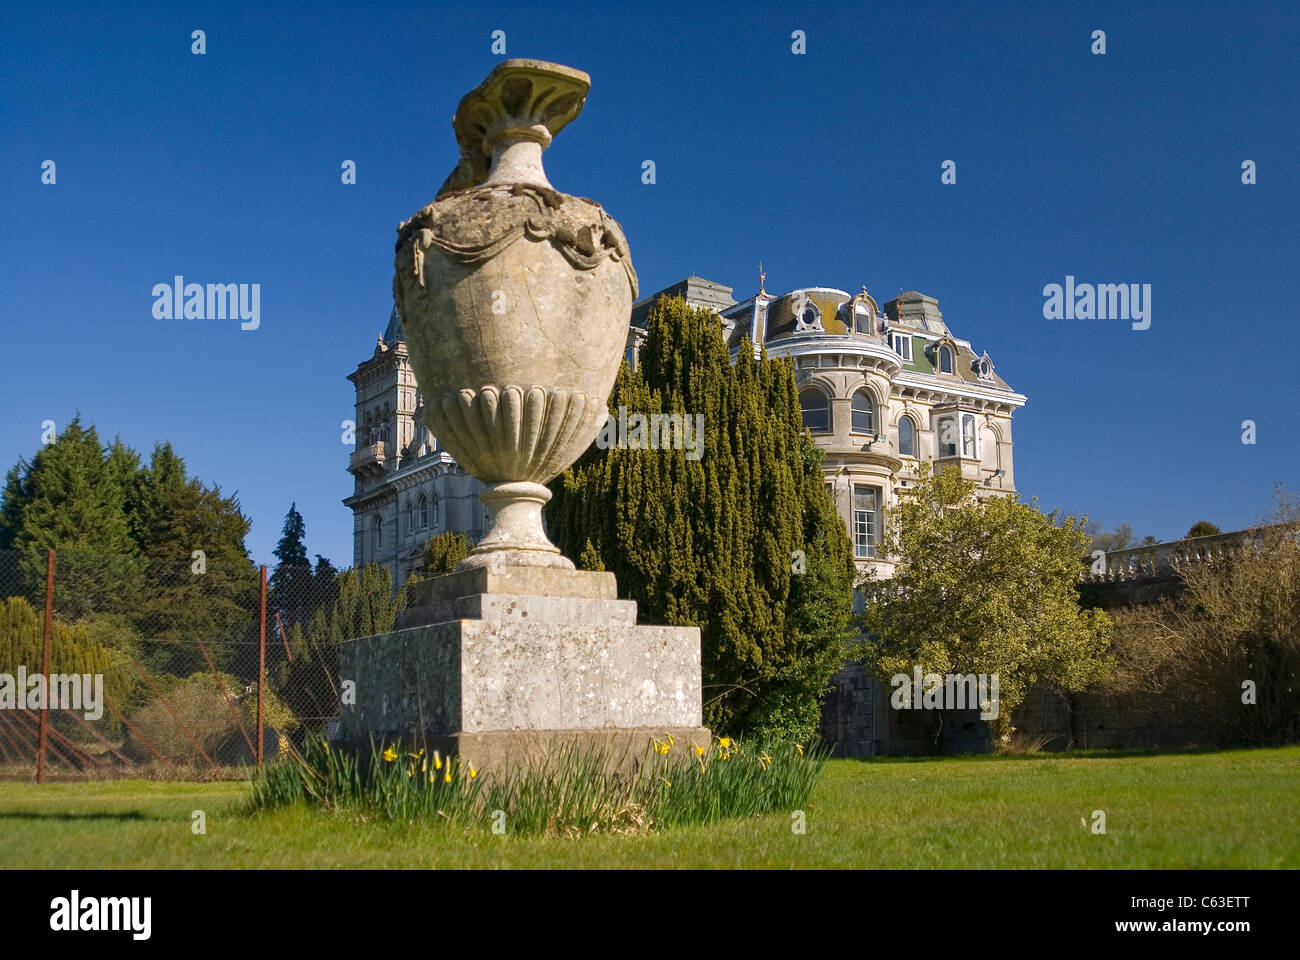 Old gothic style mansion once occupied by royalty with huge vase in the foreground Stock Photo